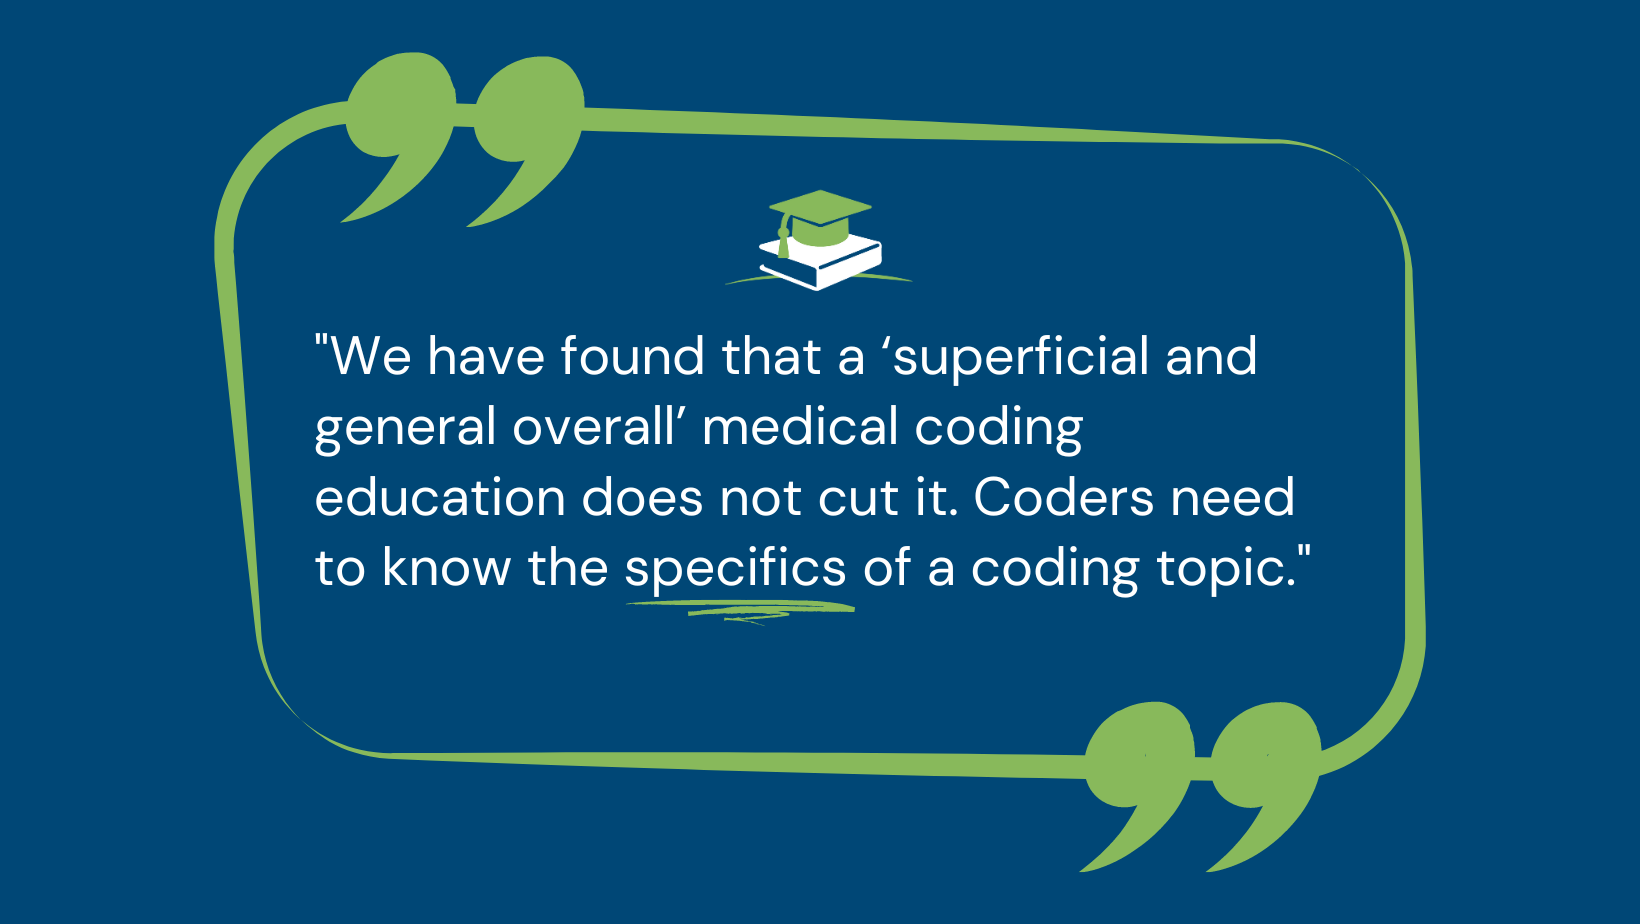 Why Your Organization Needs an Online Medical Coding Education Platform like HIAlearn